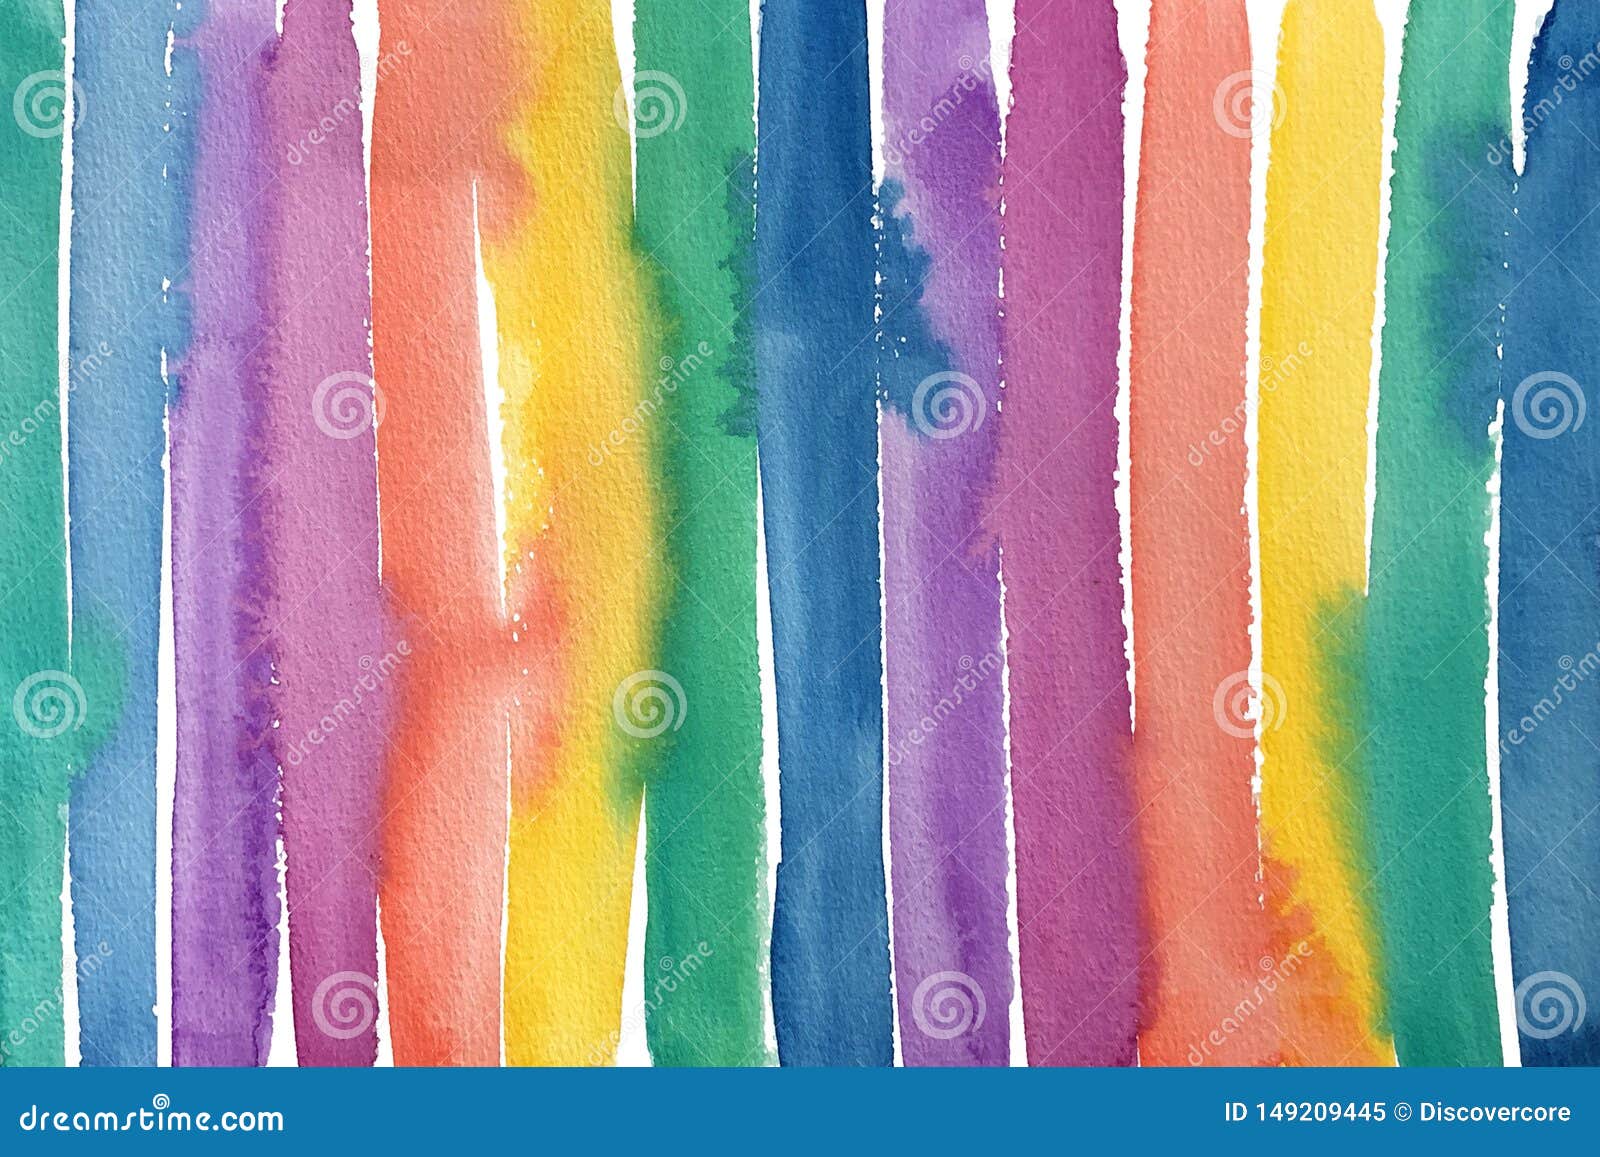 https://thumbs.dreamstime.com/z/colorful-hand-painted-watercolor-pattern-bright-rainbow-stripes-bleeding-colors-white-background-rainbows-stripes-hand-149209445.jpg